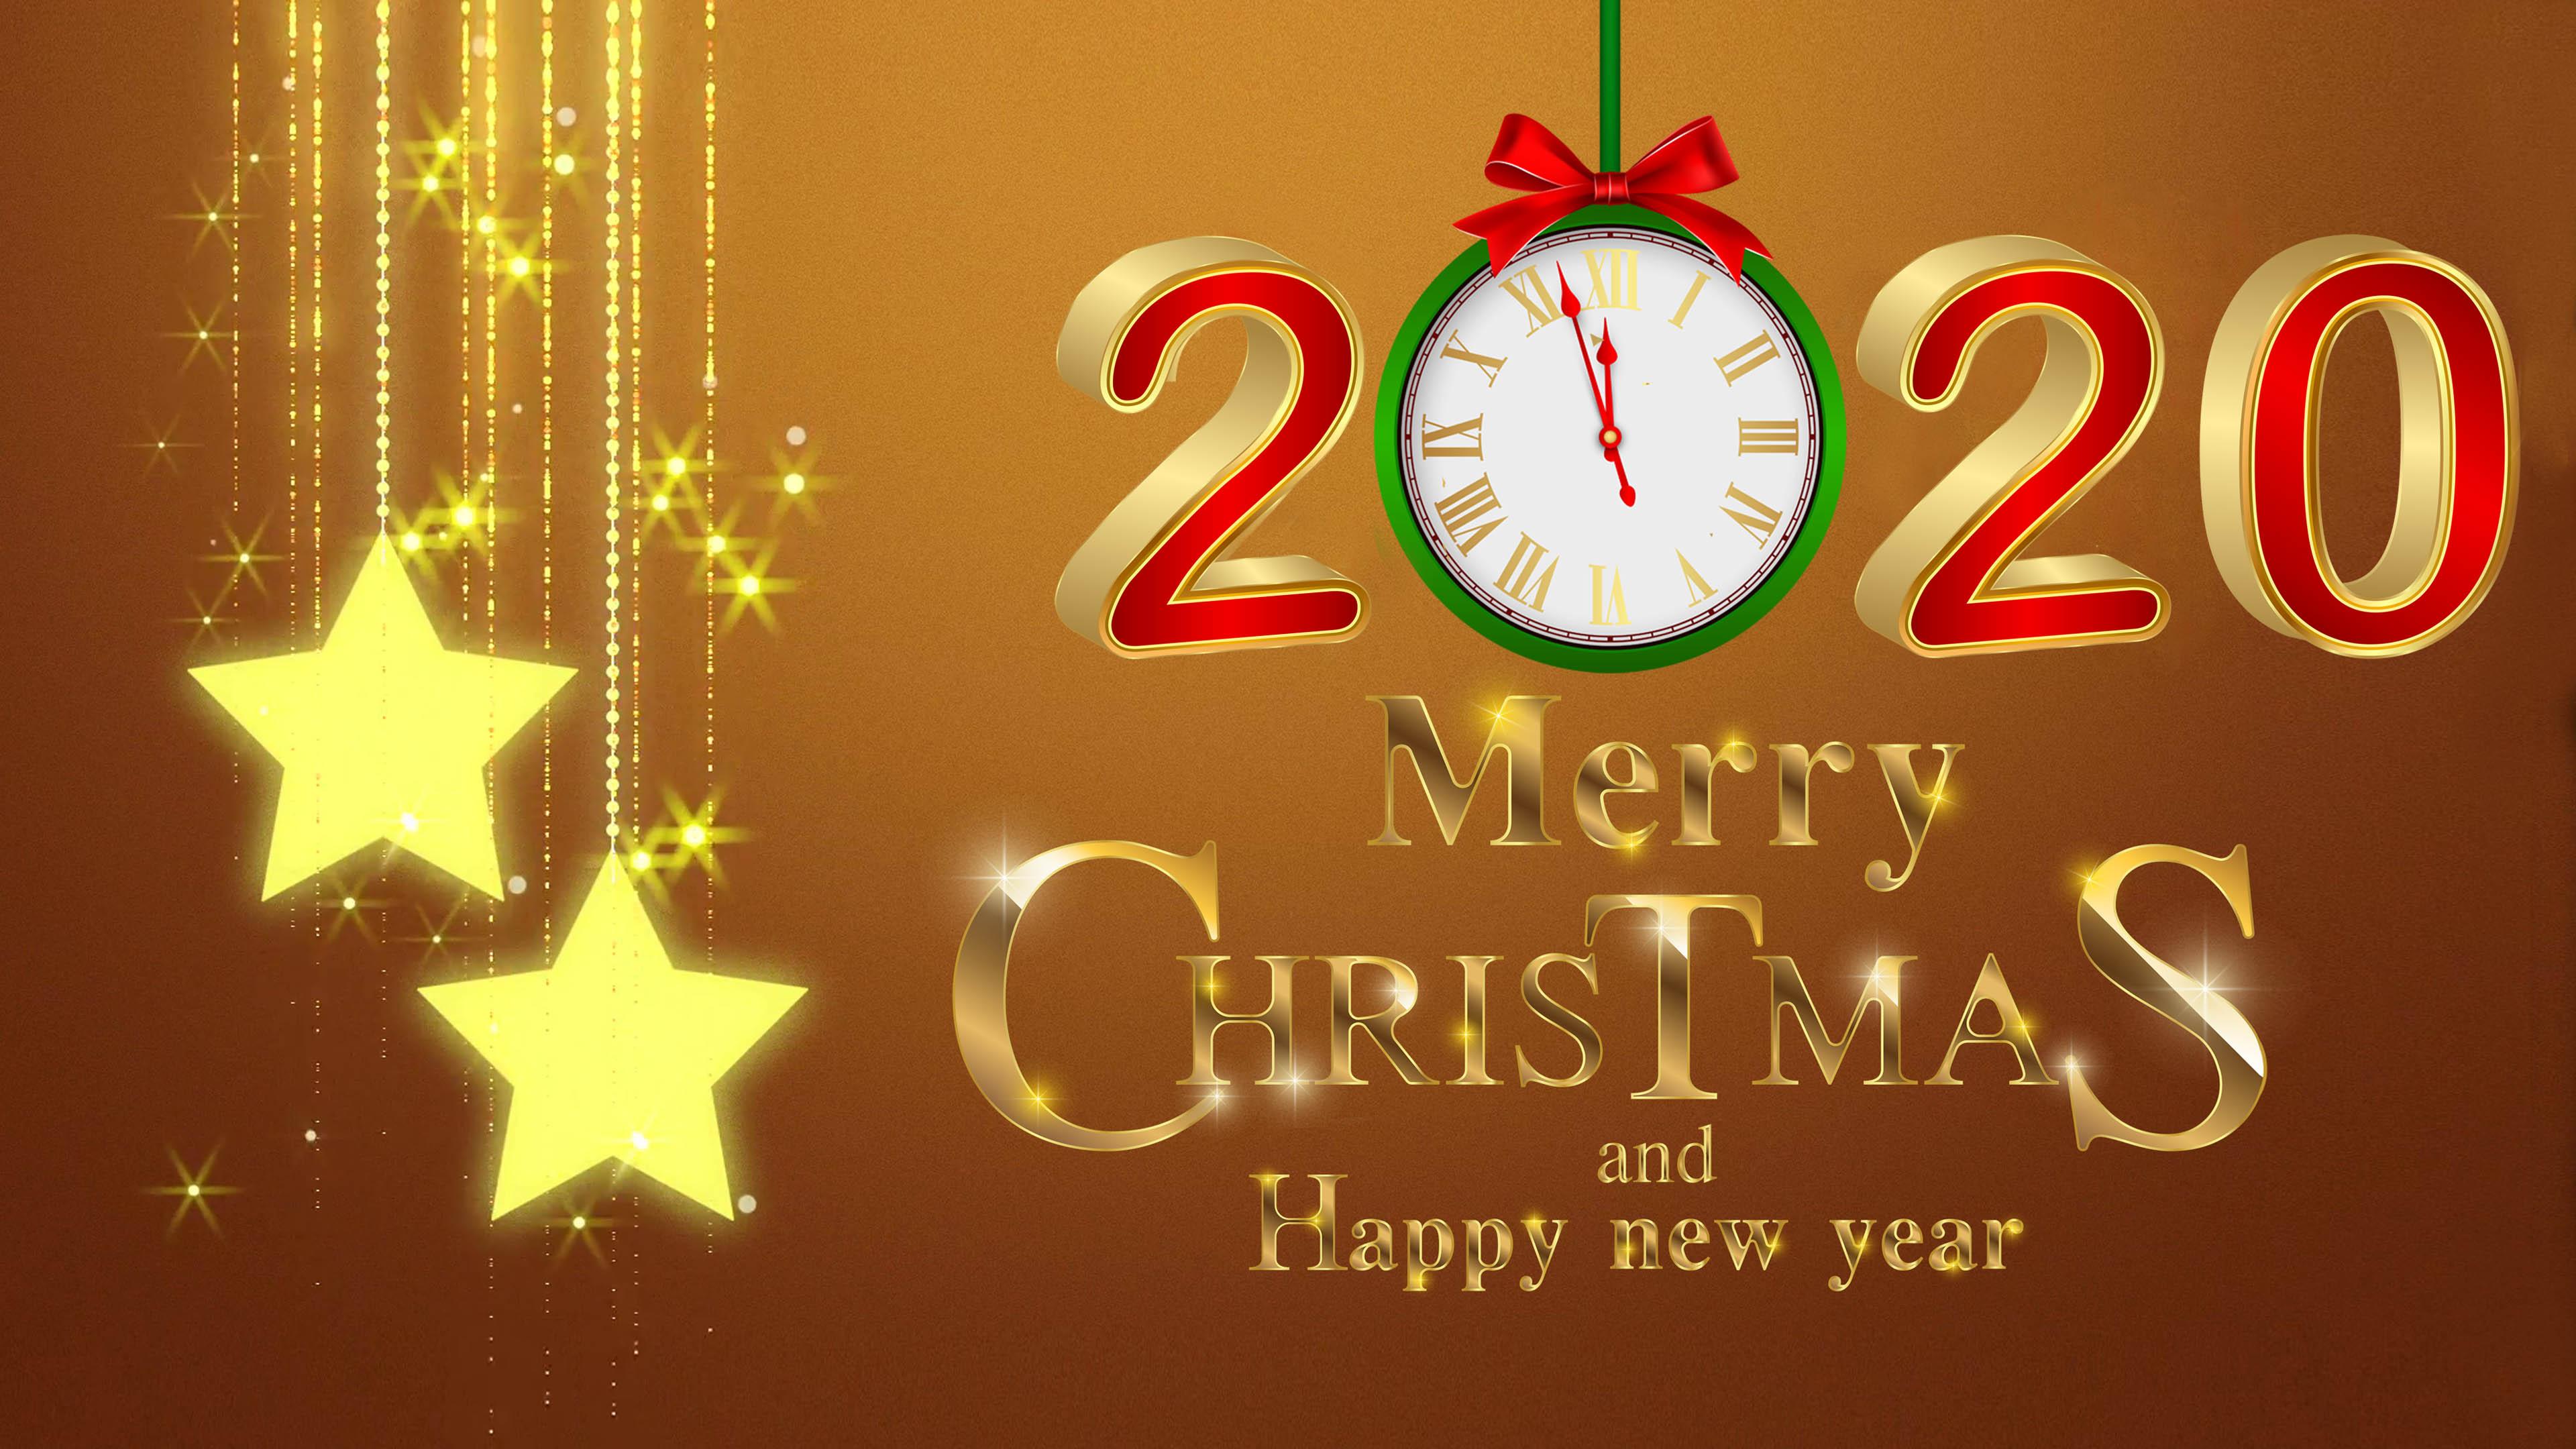 Free download Merry Christmas And Happy New Year 2020 Gold